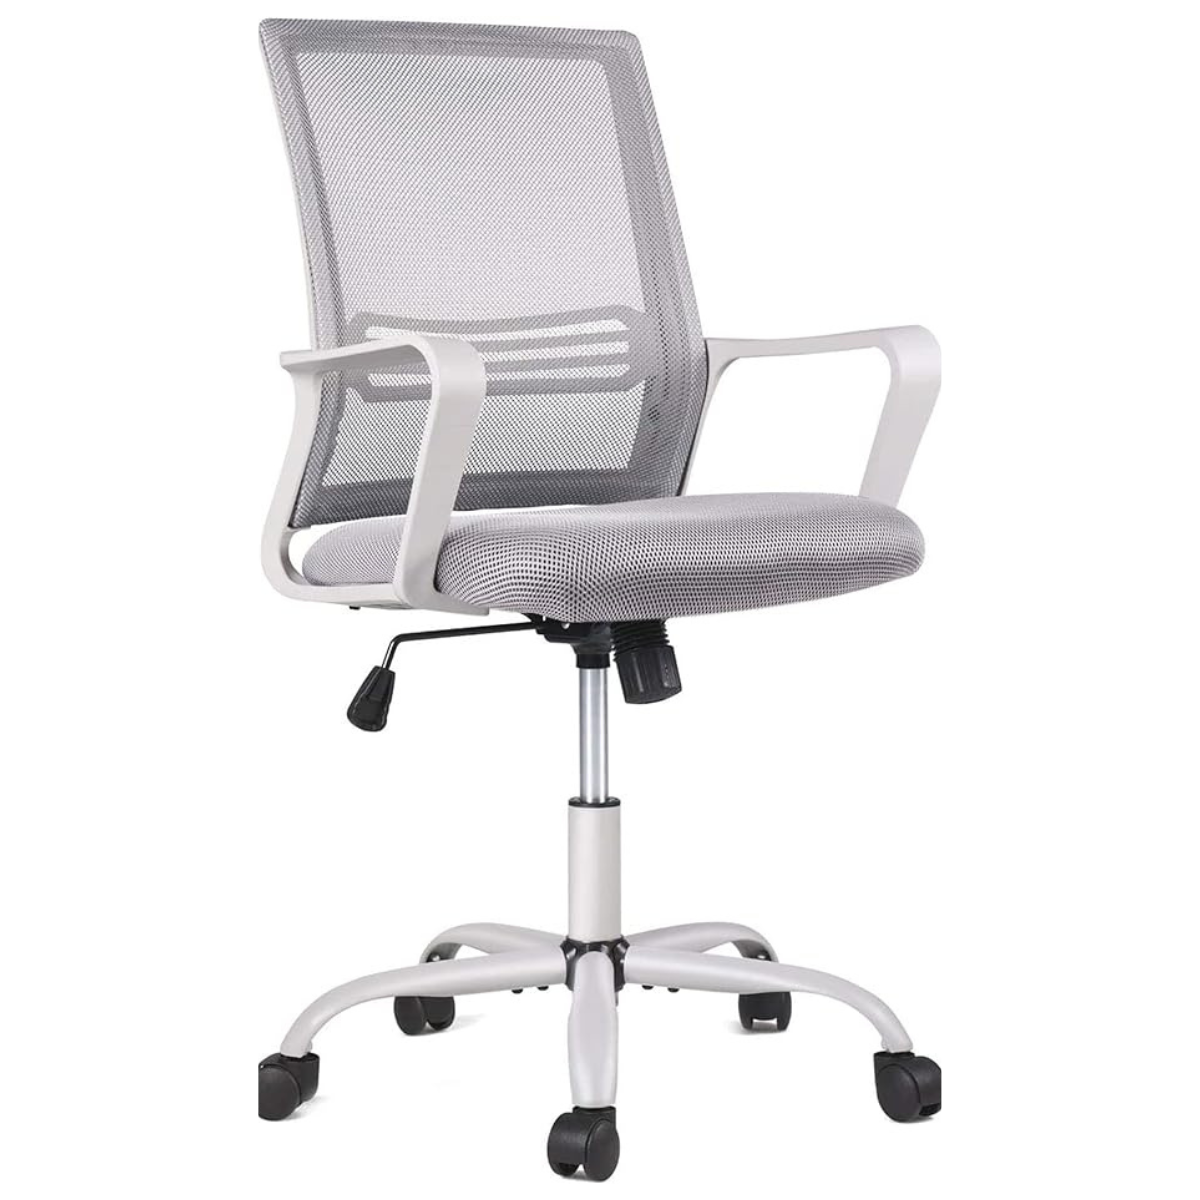 Smugdesk Ergonomic Mid Back Breathable Mesh Swivel Executive Desk Chair with Adjustable Height and Lumbar Support Armrest for Home or Office, Gray